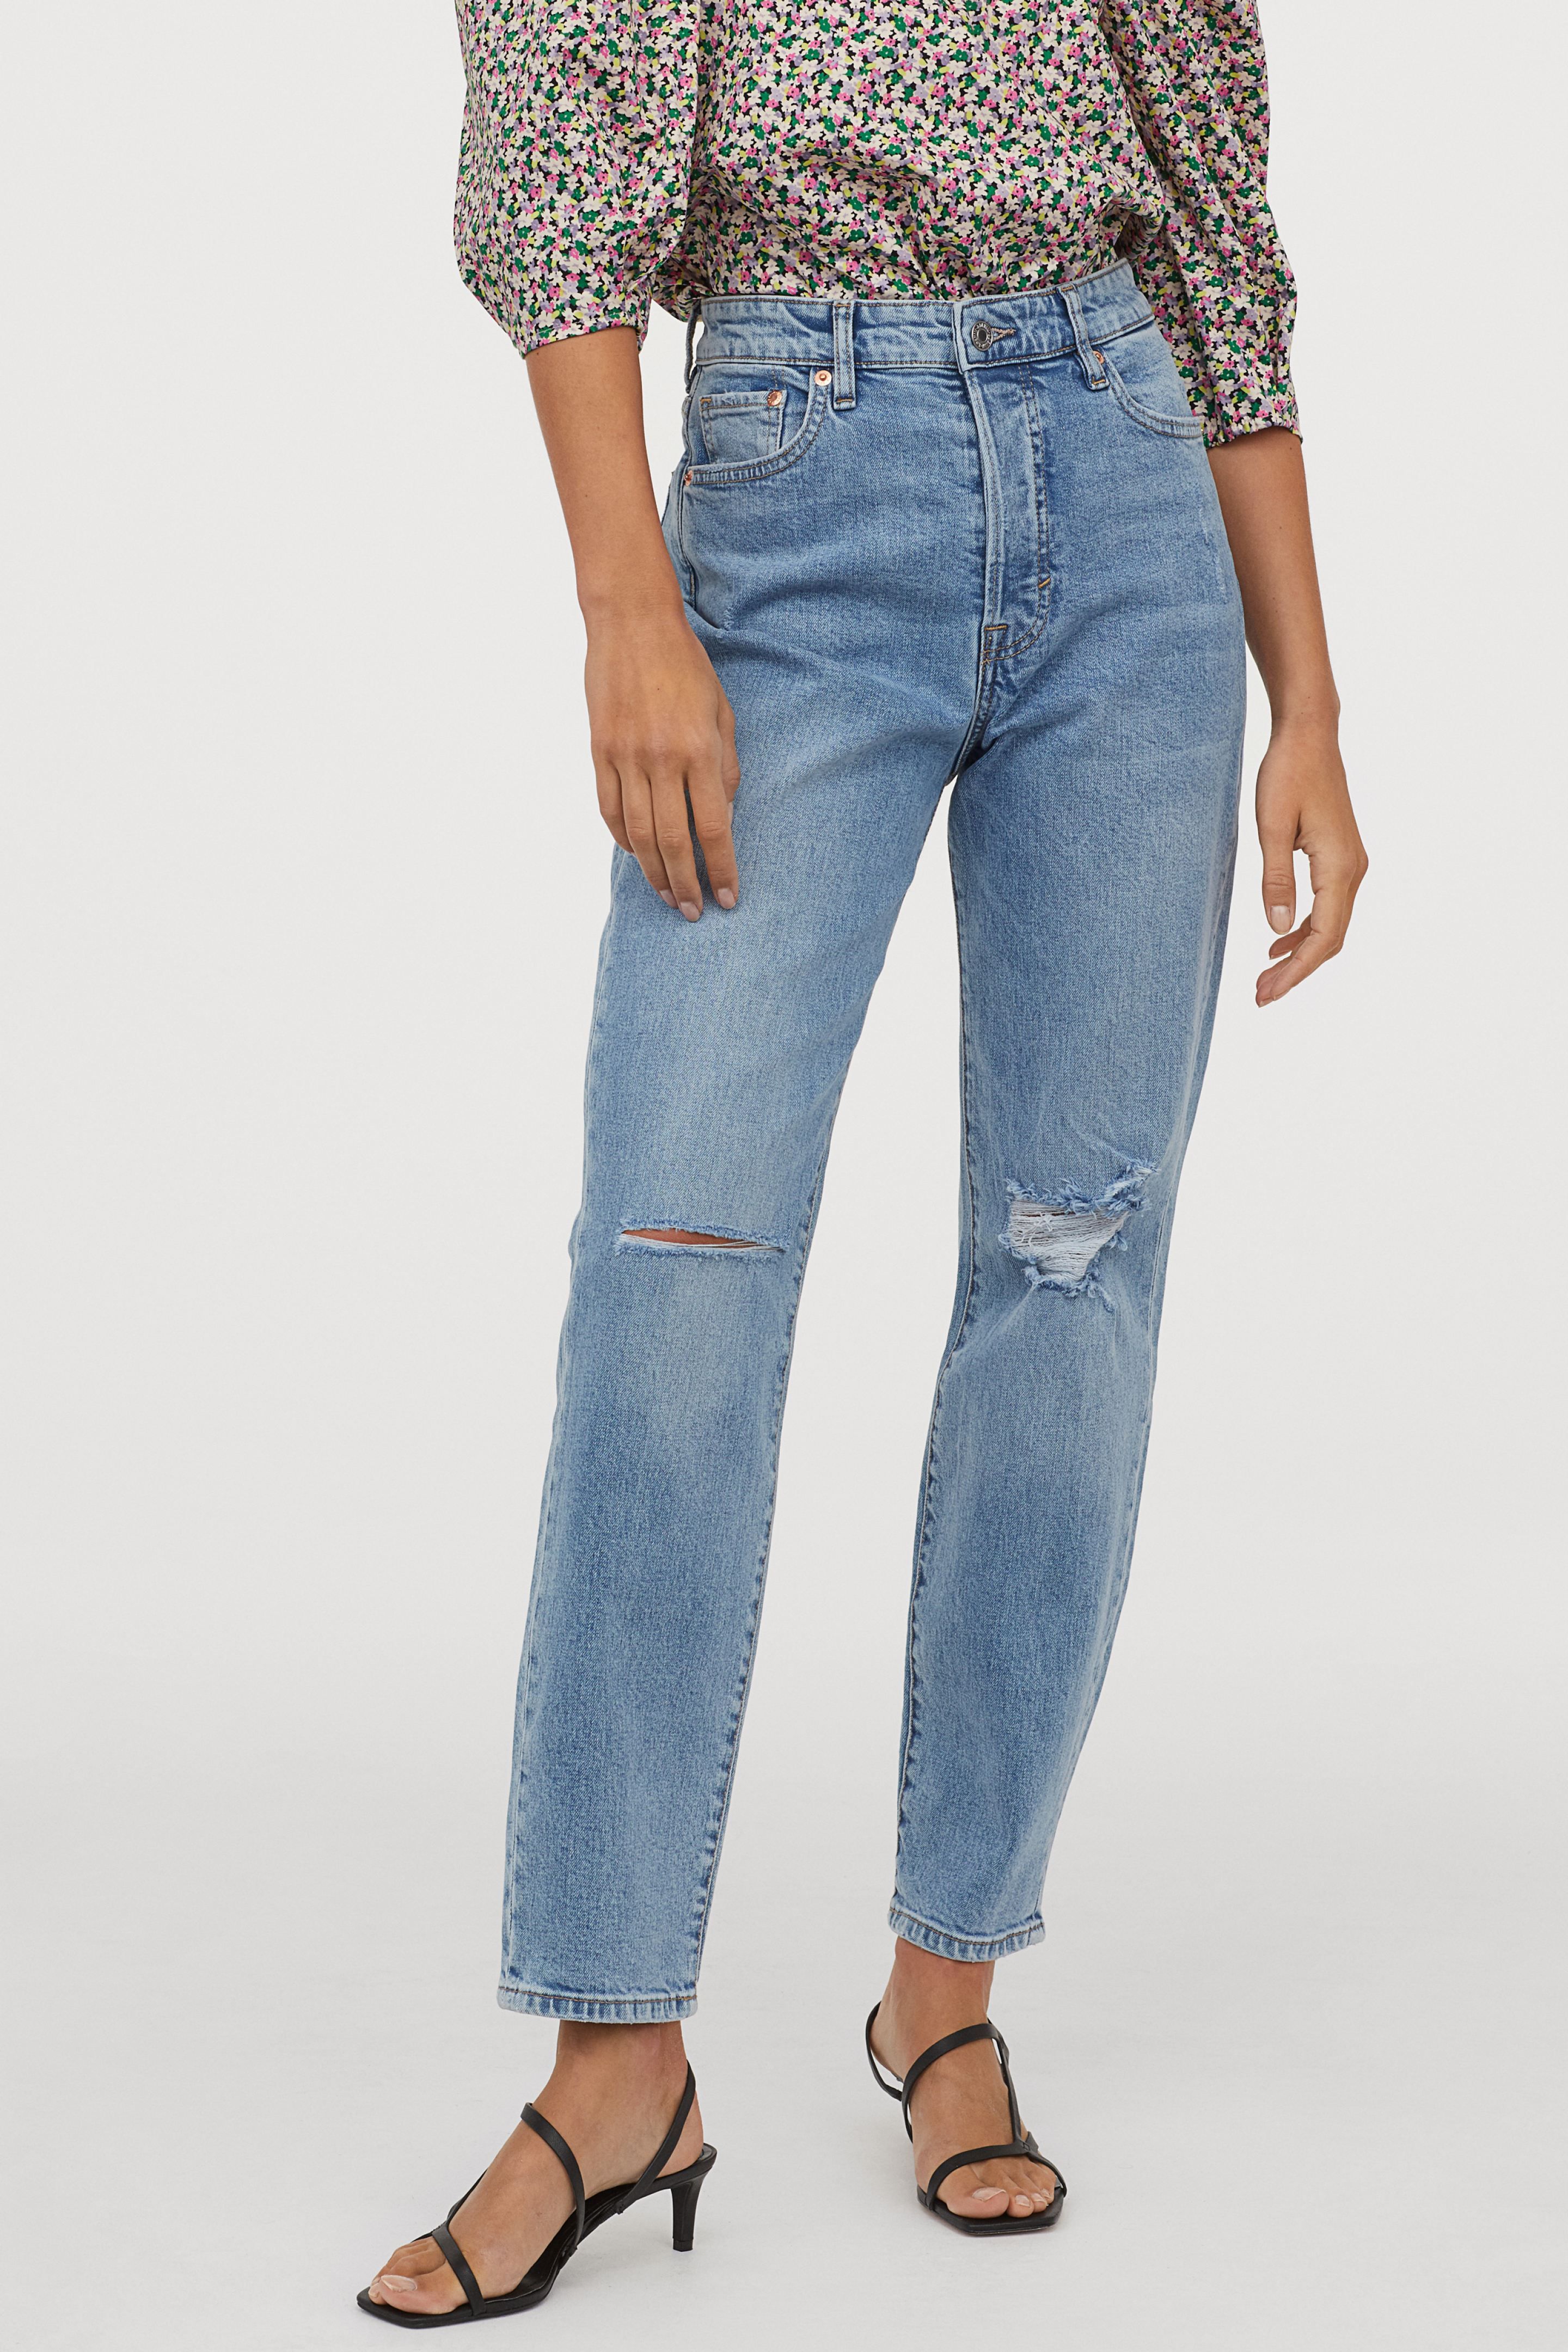 h and m mum jeans